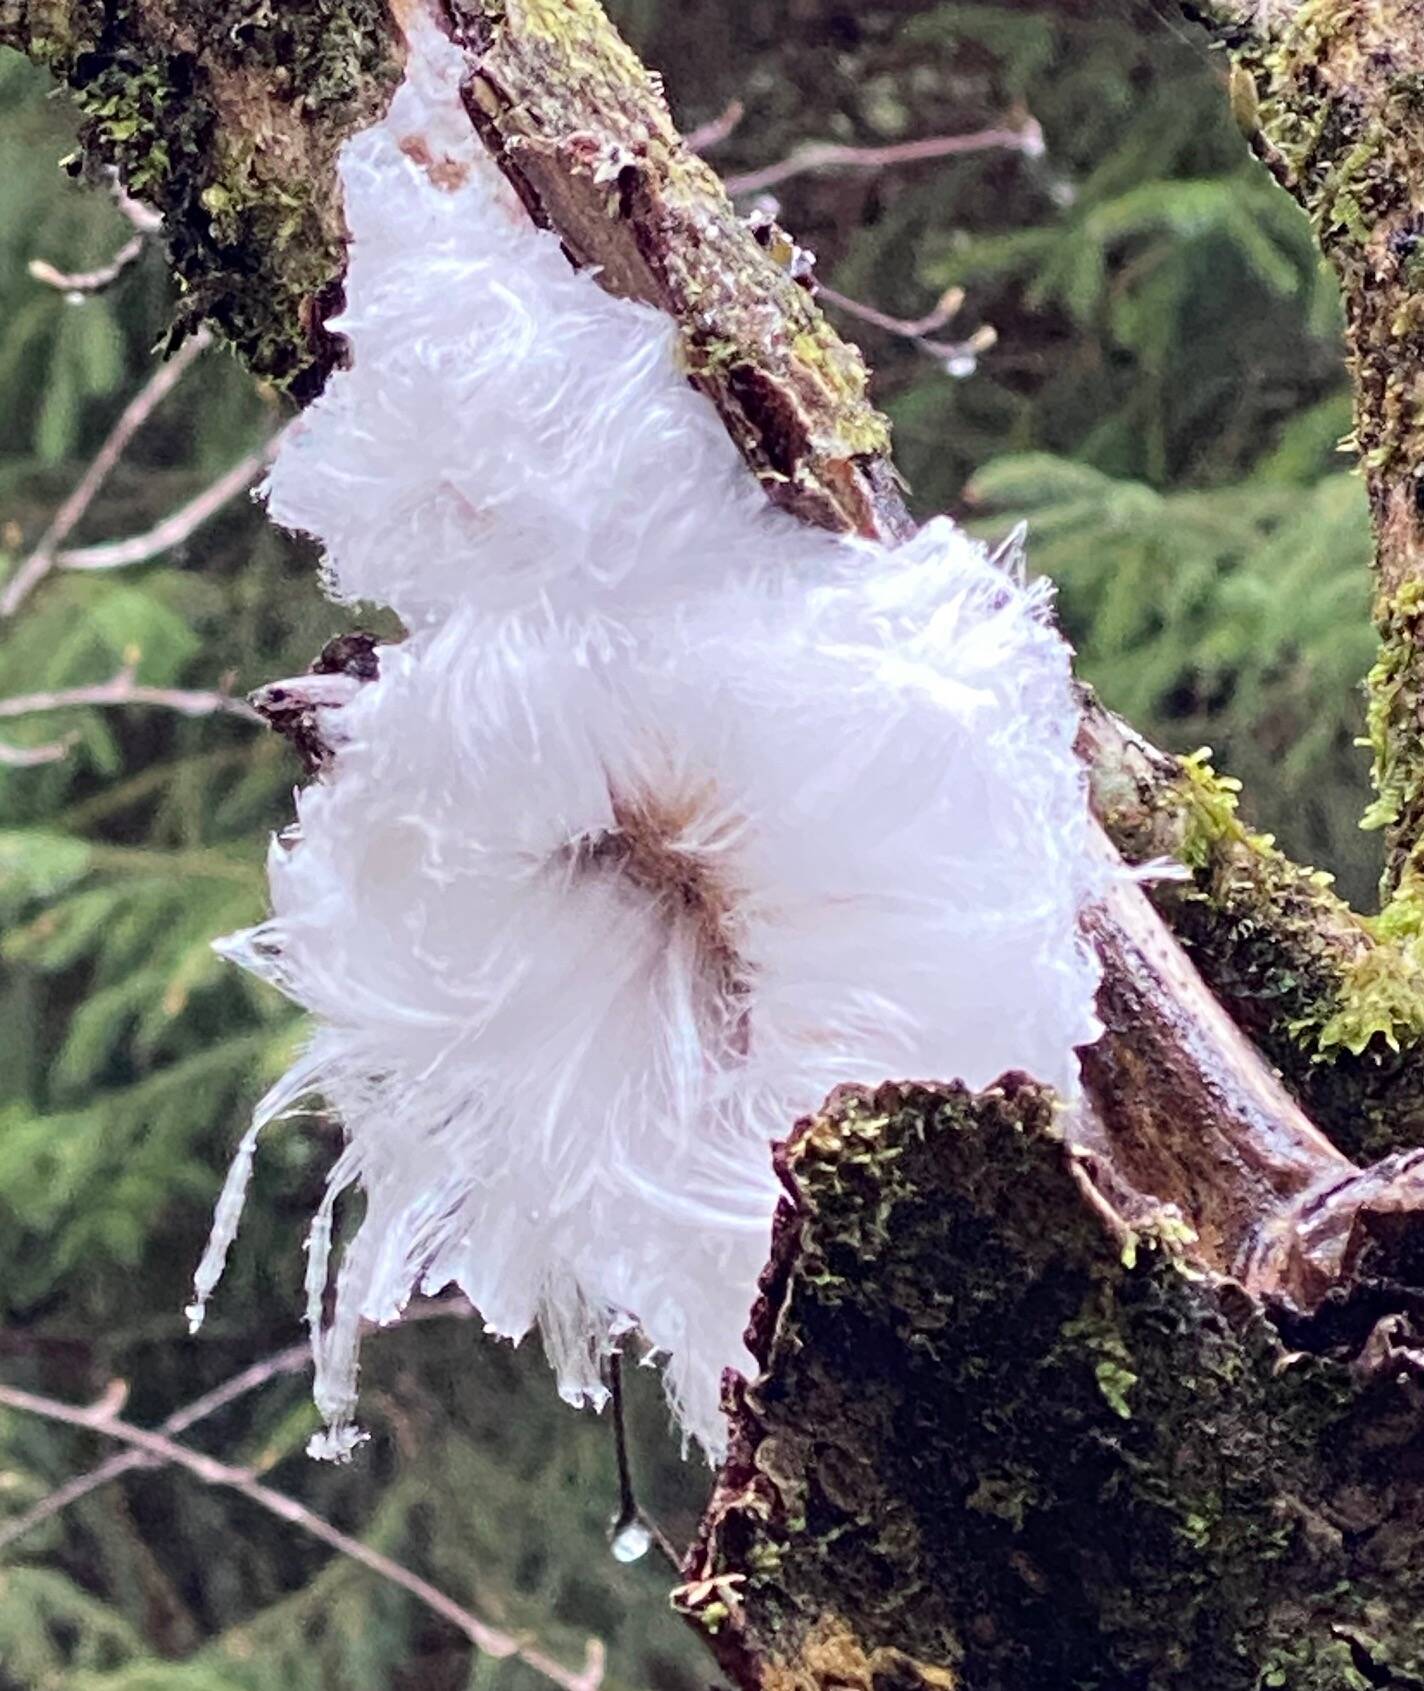 Hair ice forms an exotic flower along the East Glacier Trail on Nov. 29. (Photo by Denise Carroll)